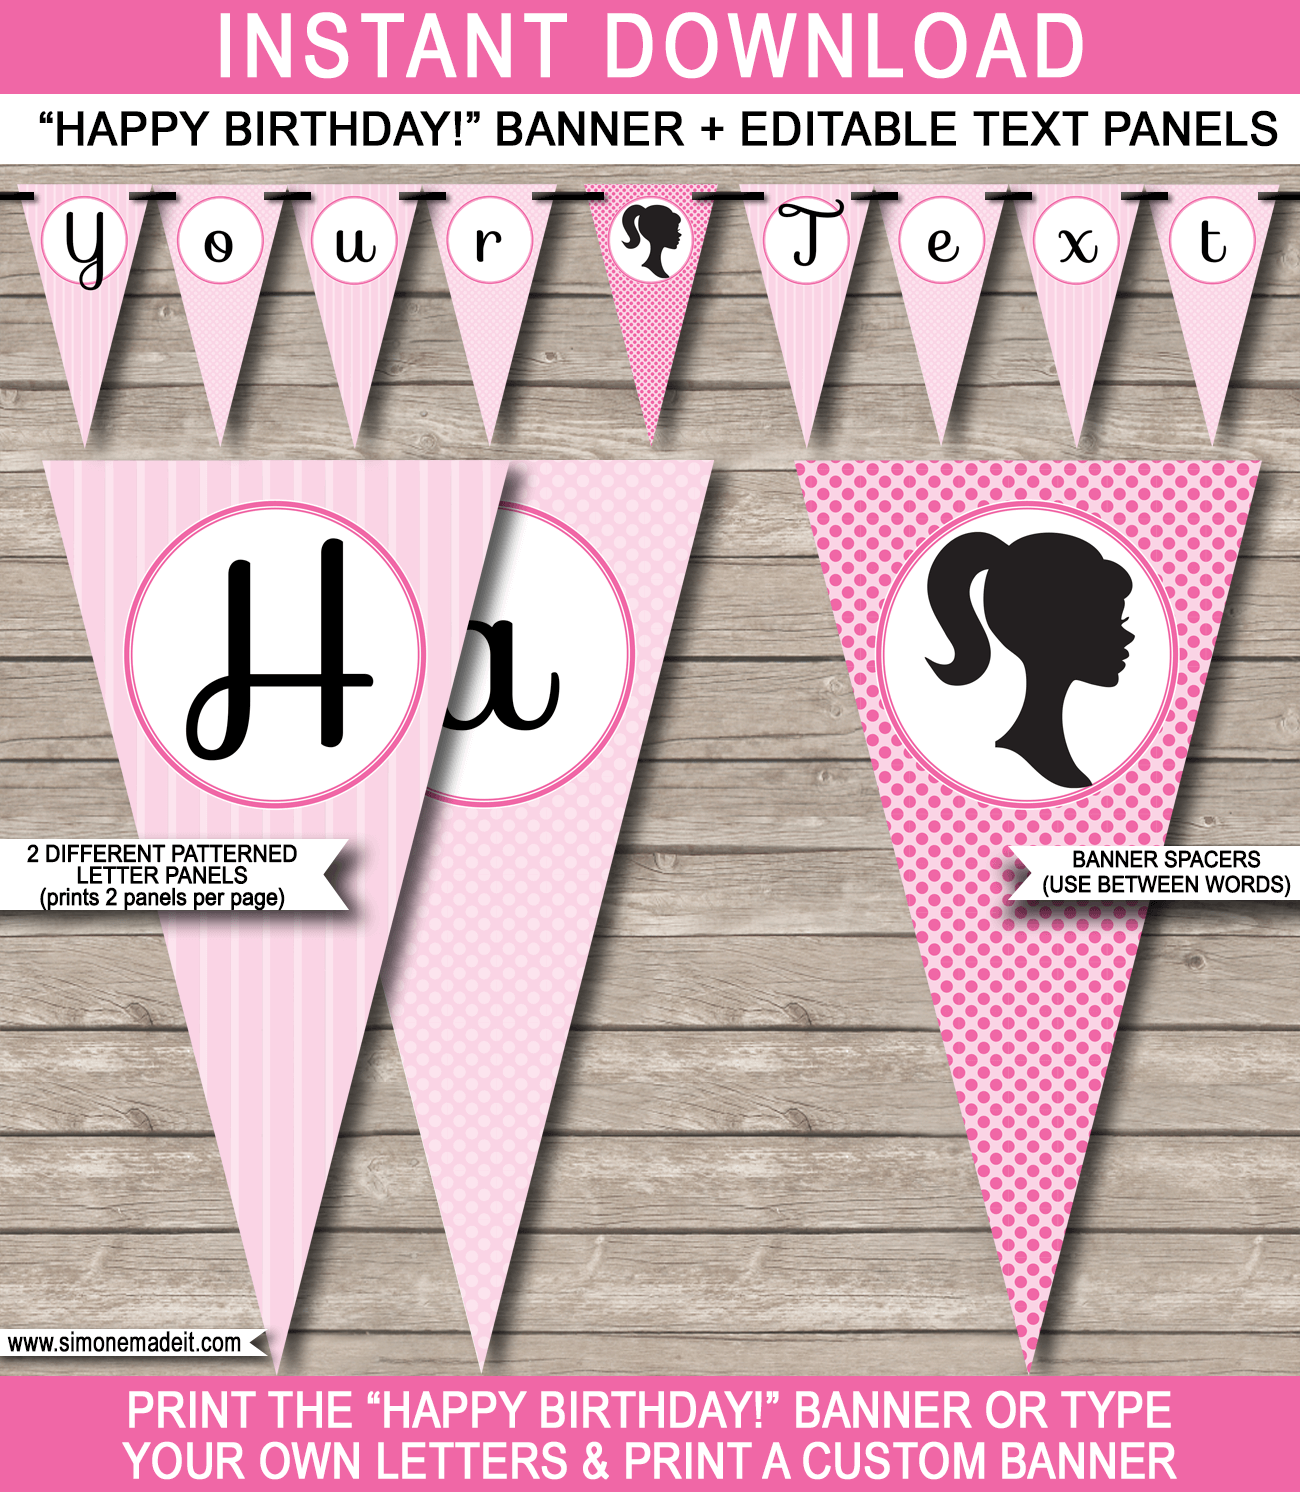 Barbie Party Banner Template - Barbie Bunting - Happy Birthday Banner - Birthday Party - Editable and Printable DIY Template - INSTANT DOWNLOAD $4.50 via simonemadeit.com